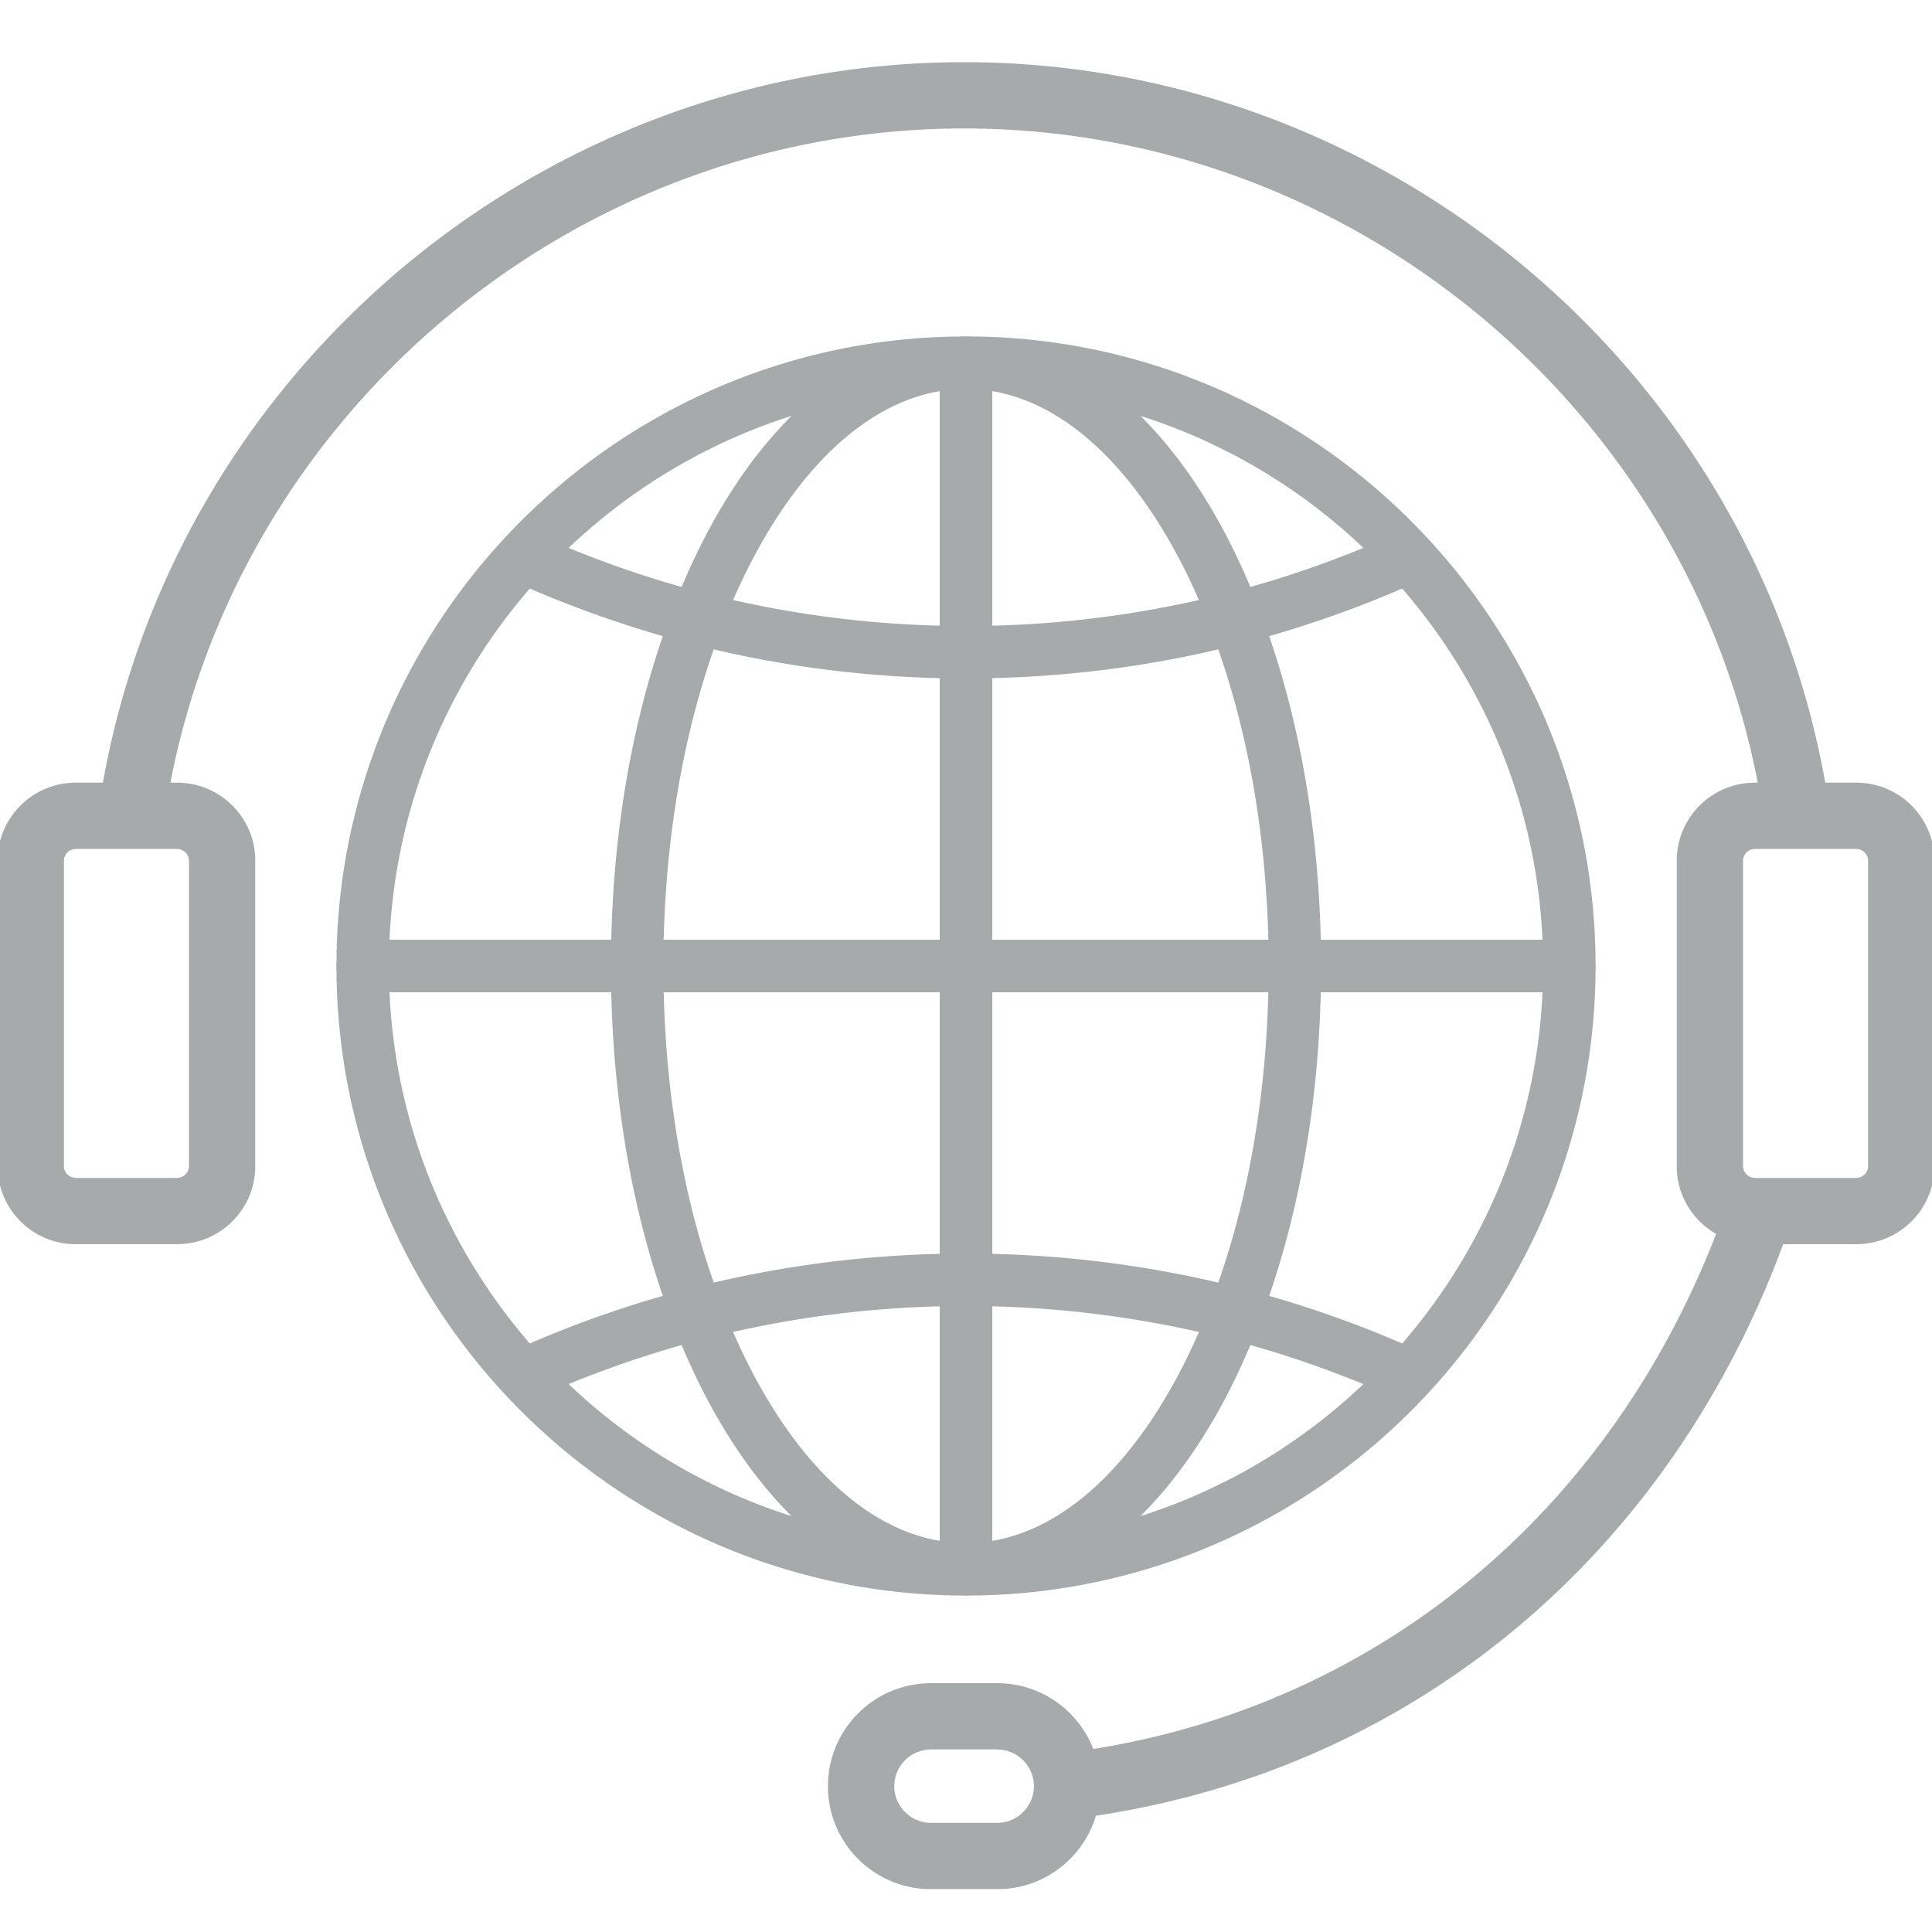 An icon of a globe with a headset around it